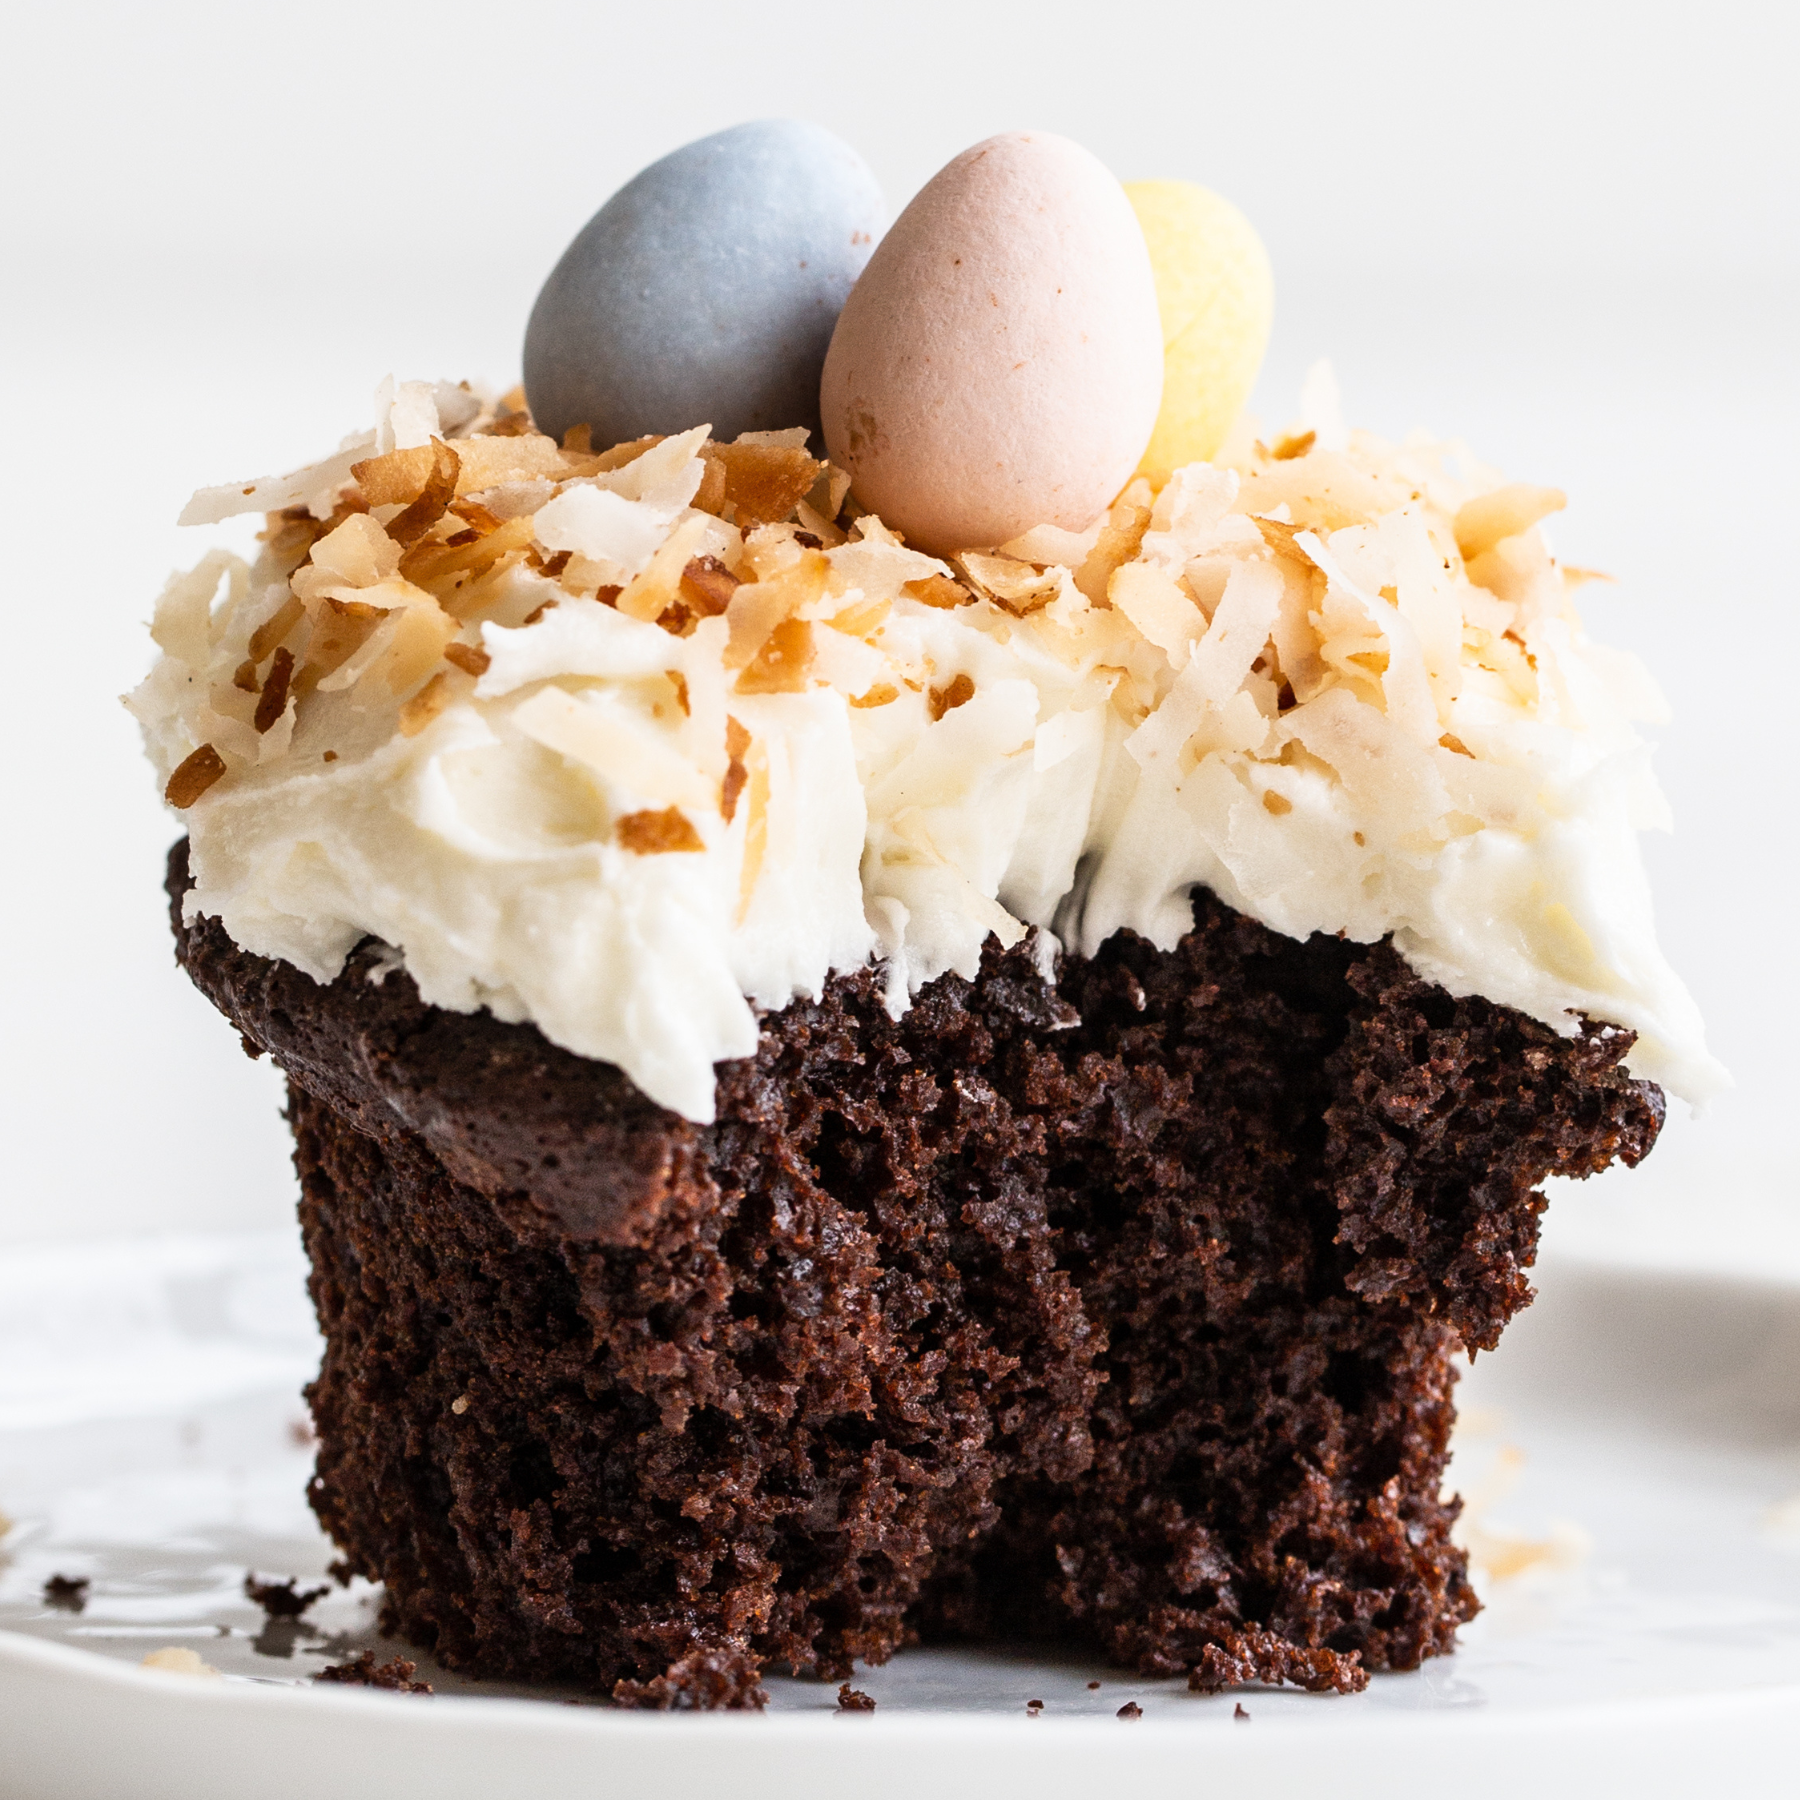 a chocolate cupcake with coconut frosting, topped with toasted coconut and chocolate eggs, with a bite taken out.